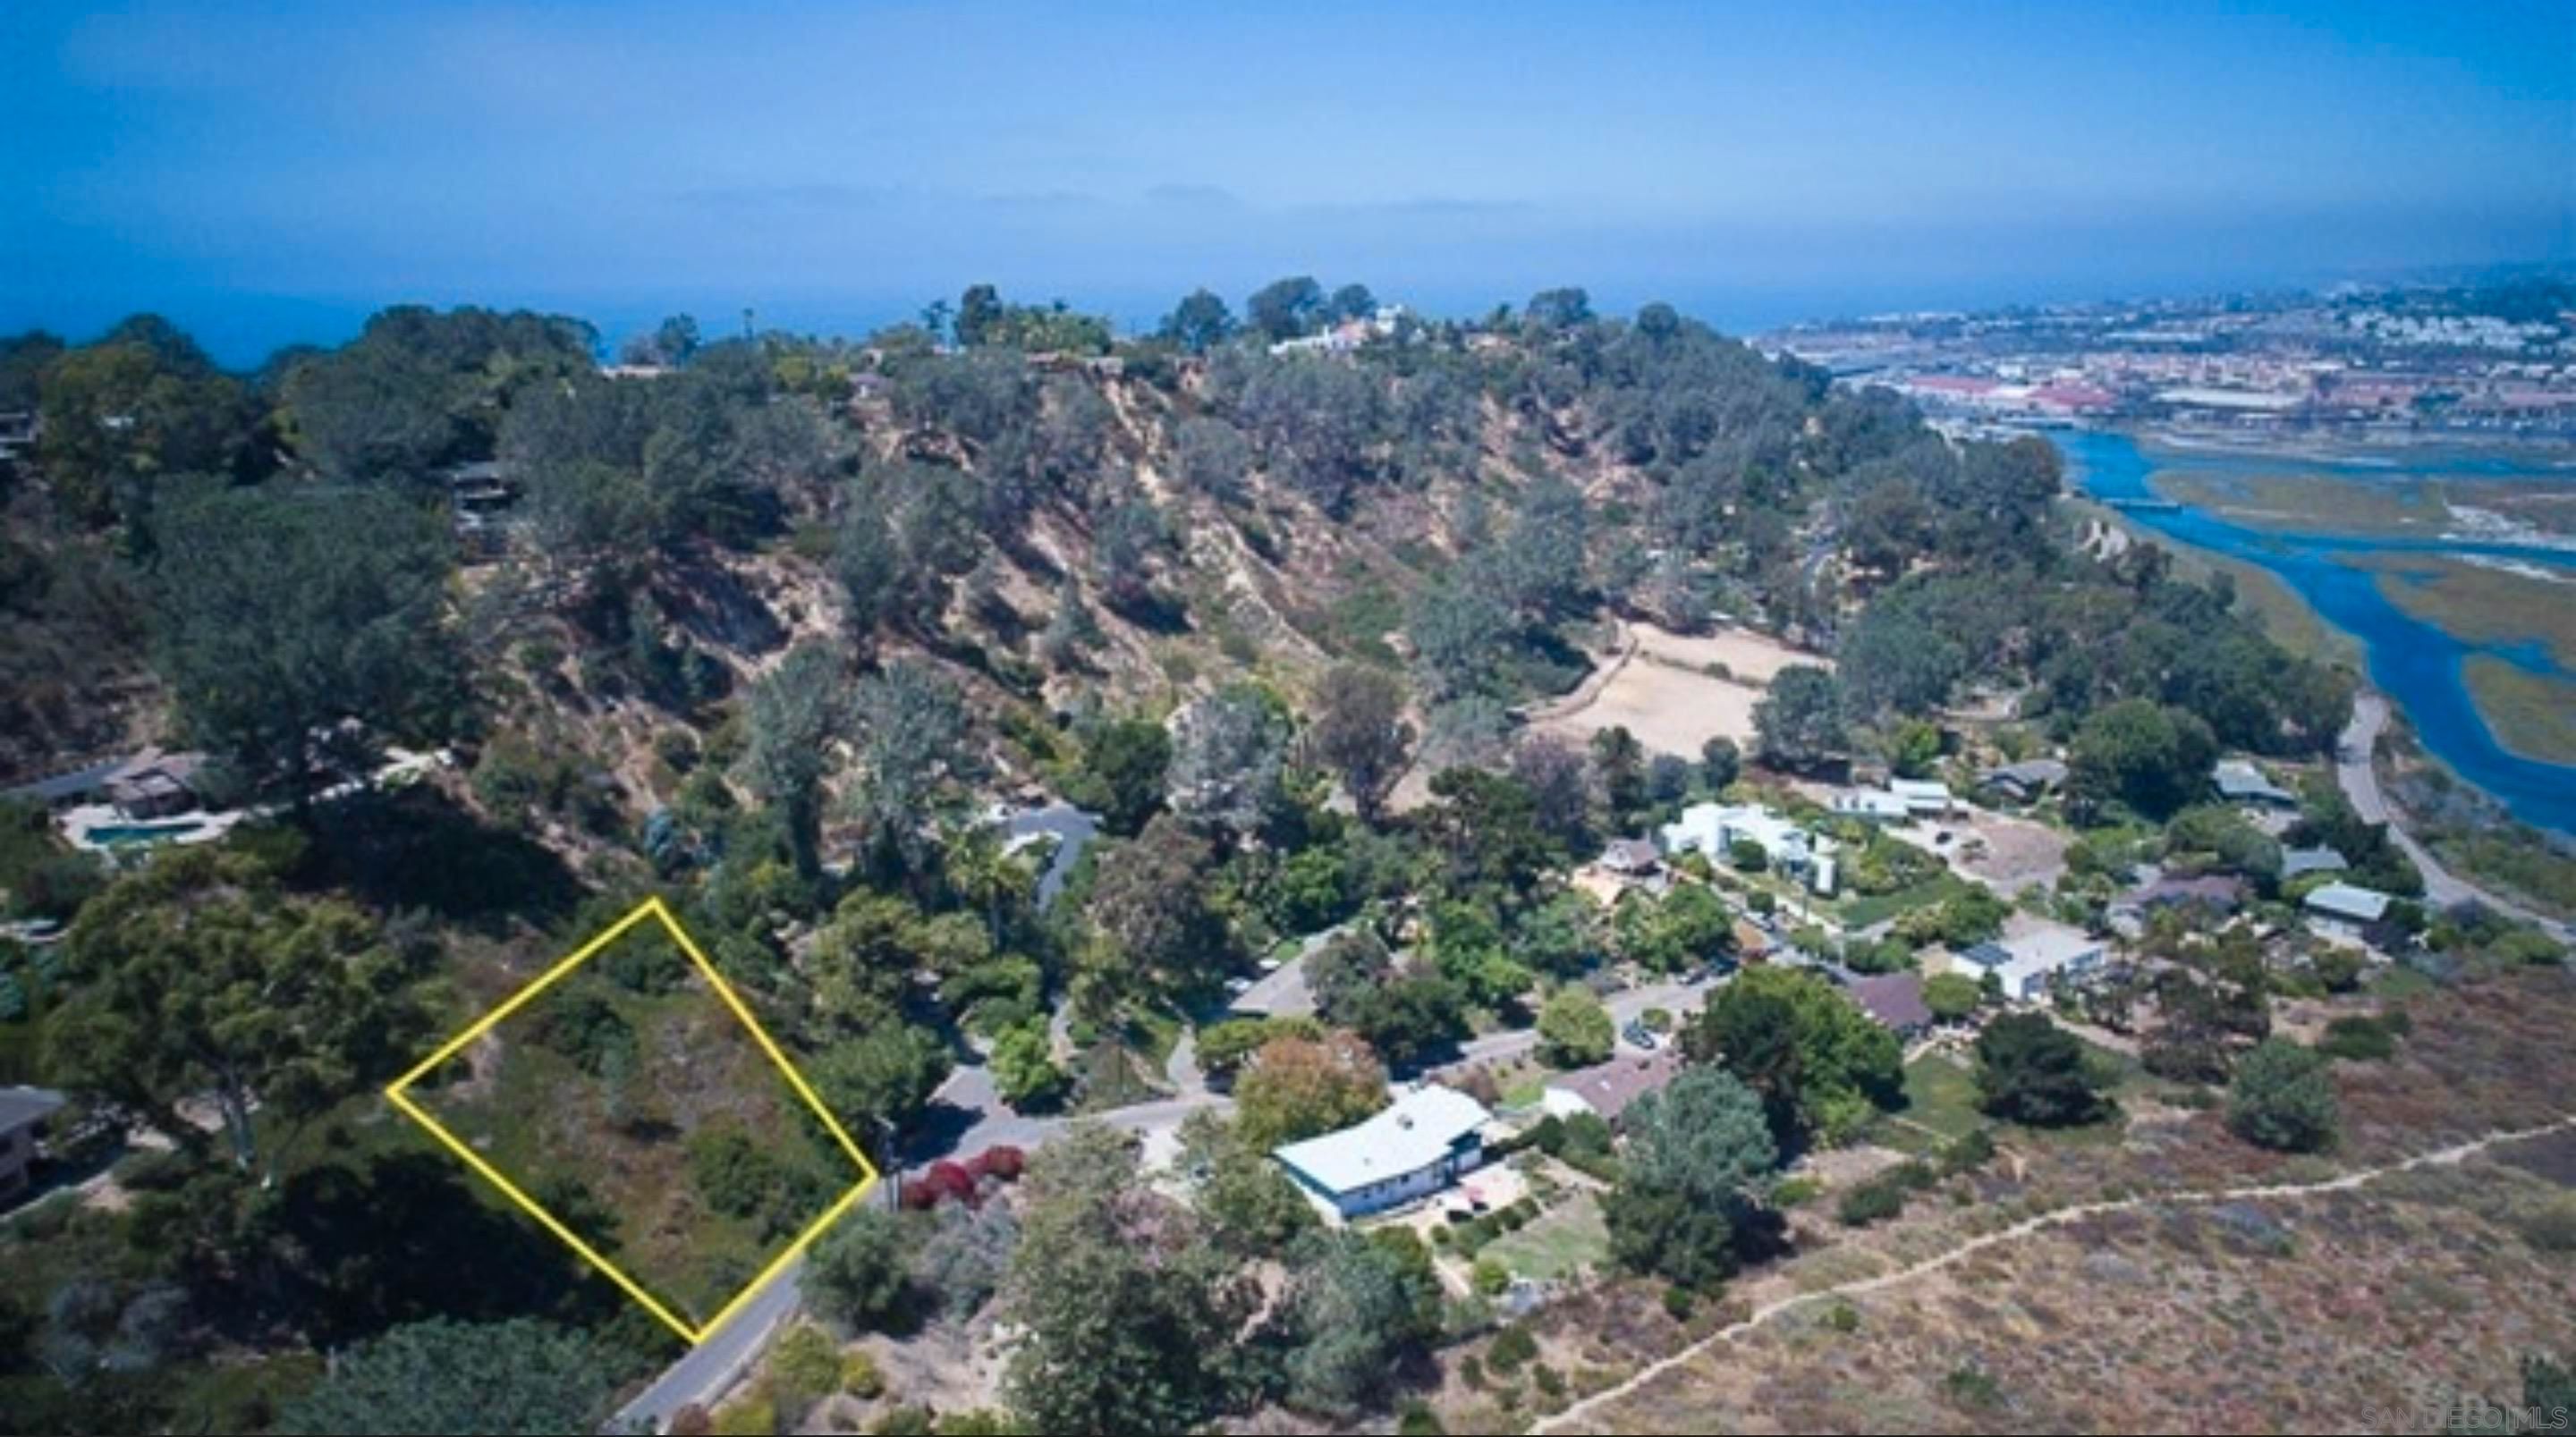 Main Photo: DEL MAR Property for sale: 1420 Oribia Rd